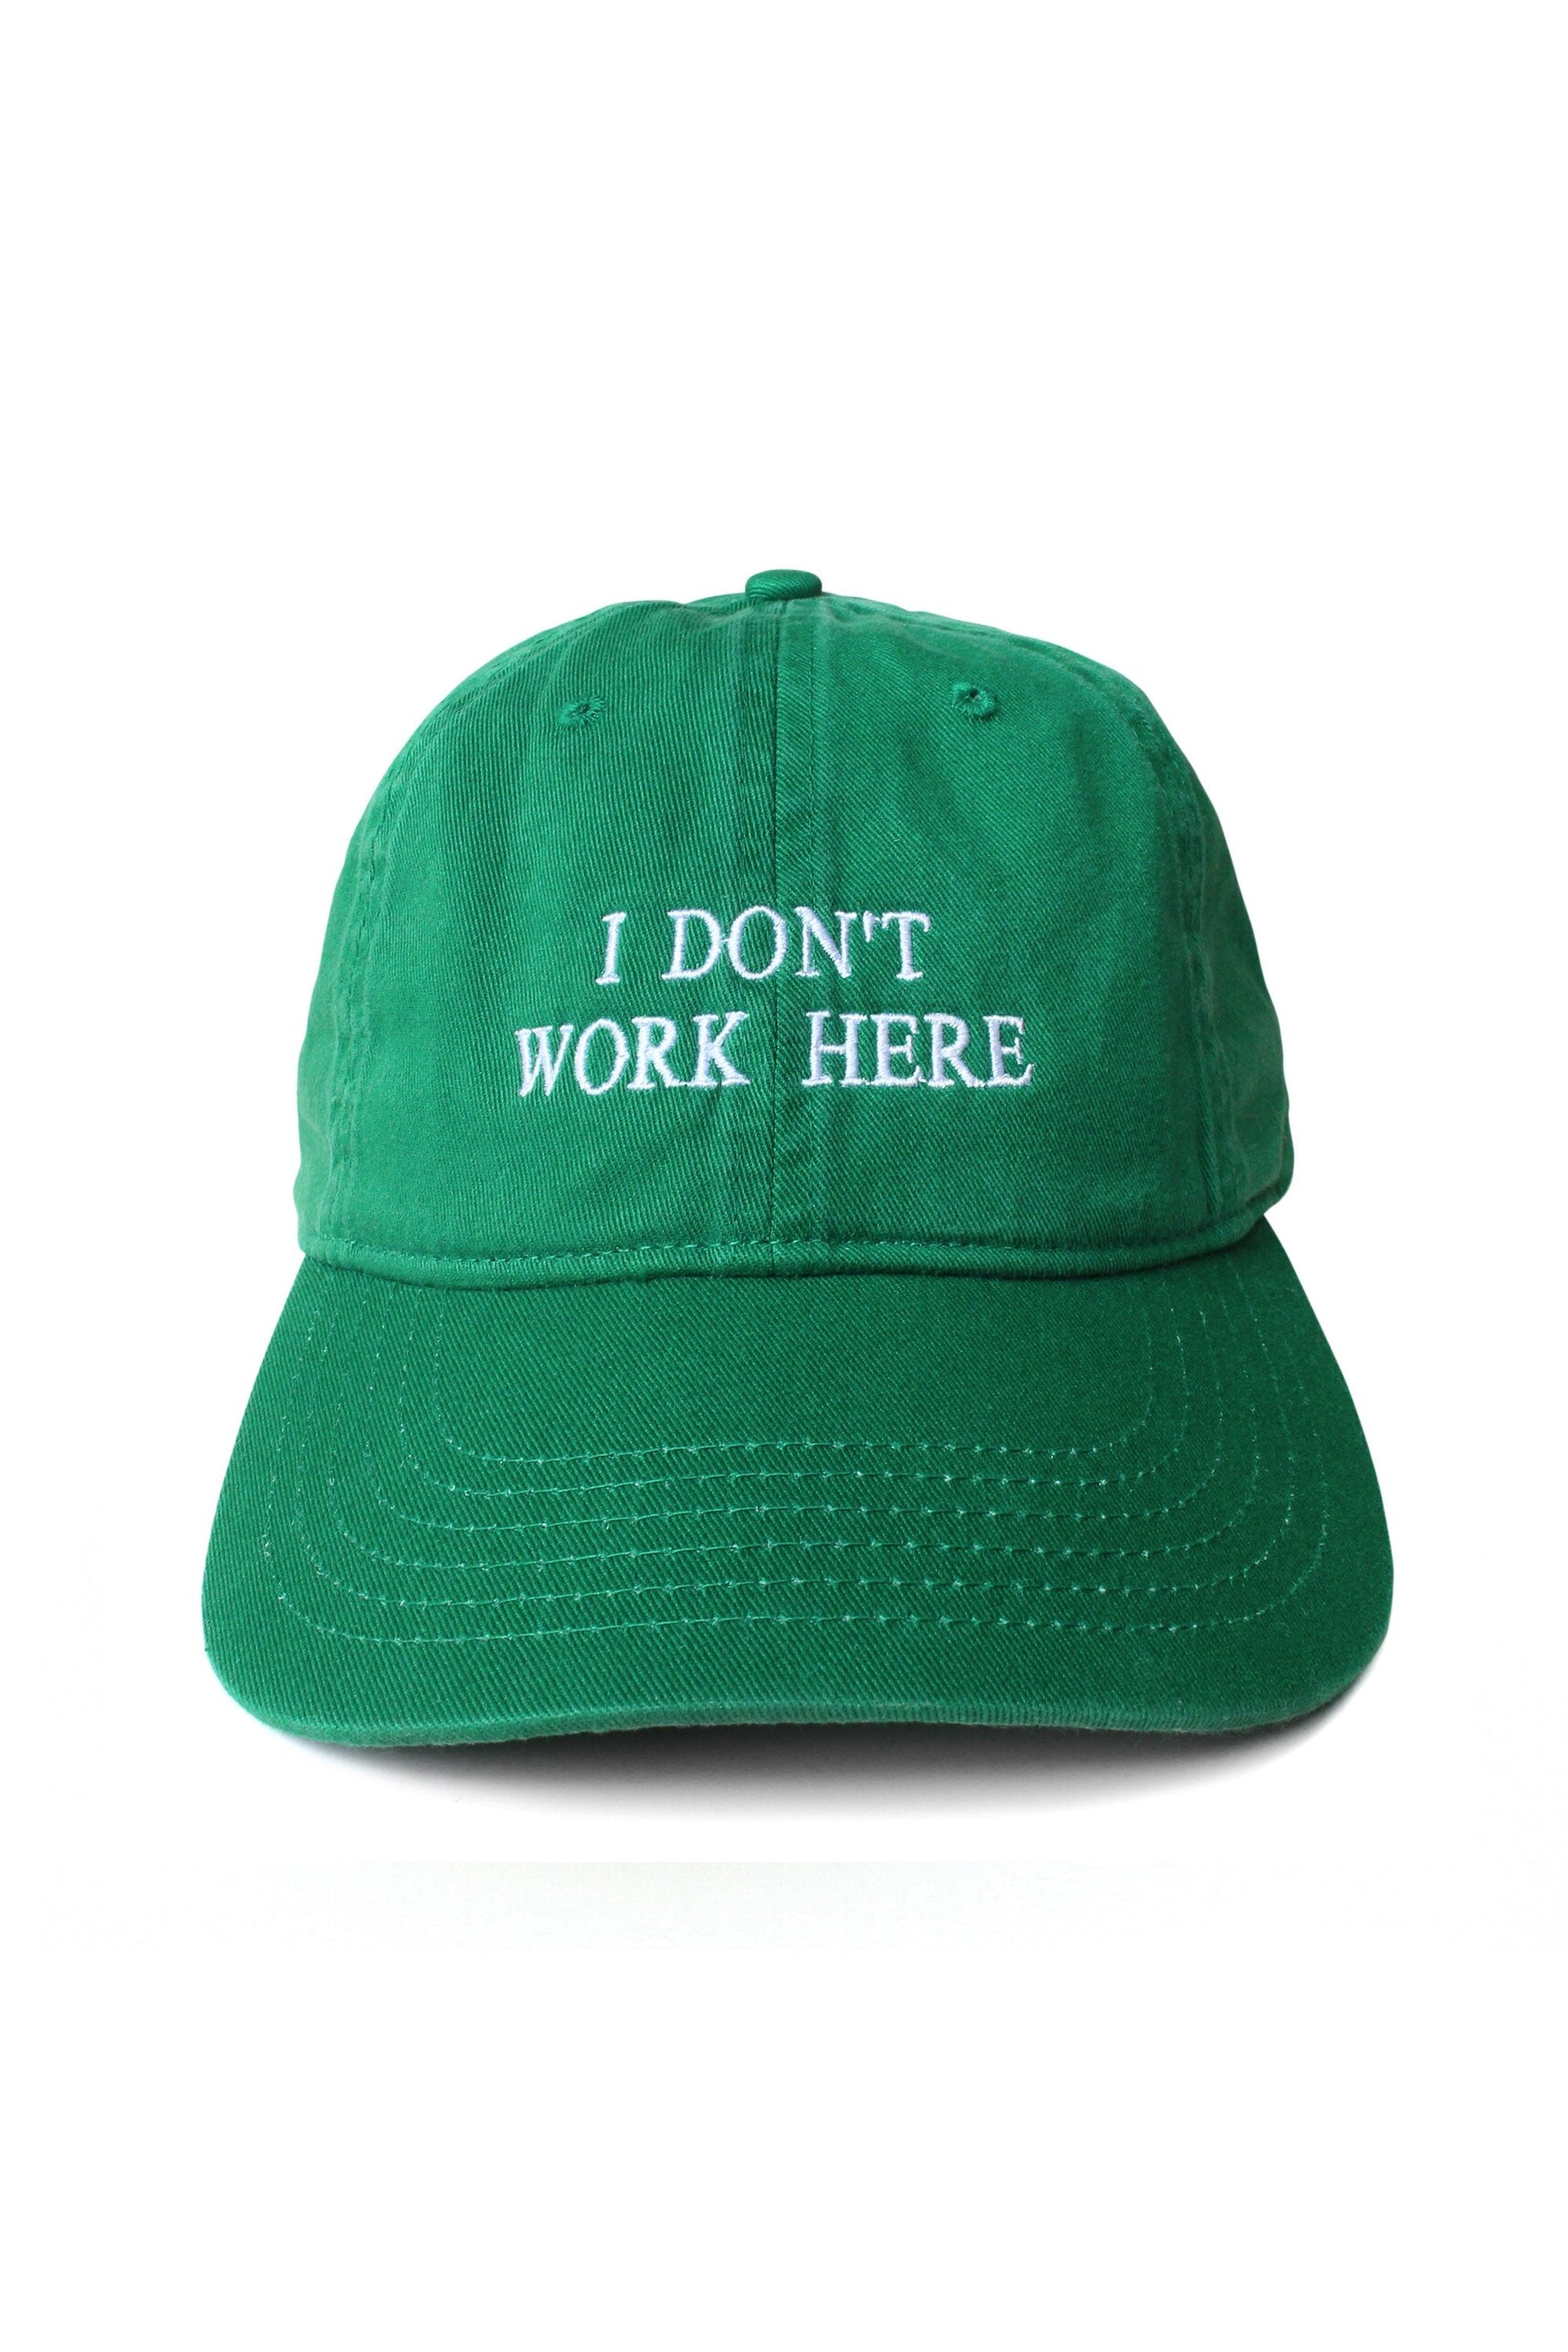 The IDEA - SORRY I DON'T WORK HERE CAP GREEN available online with global shipping, and in PAM Stores Melbourne and Sydney.